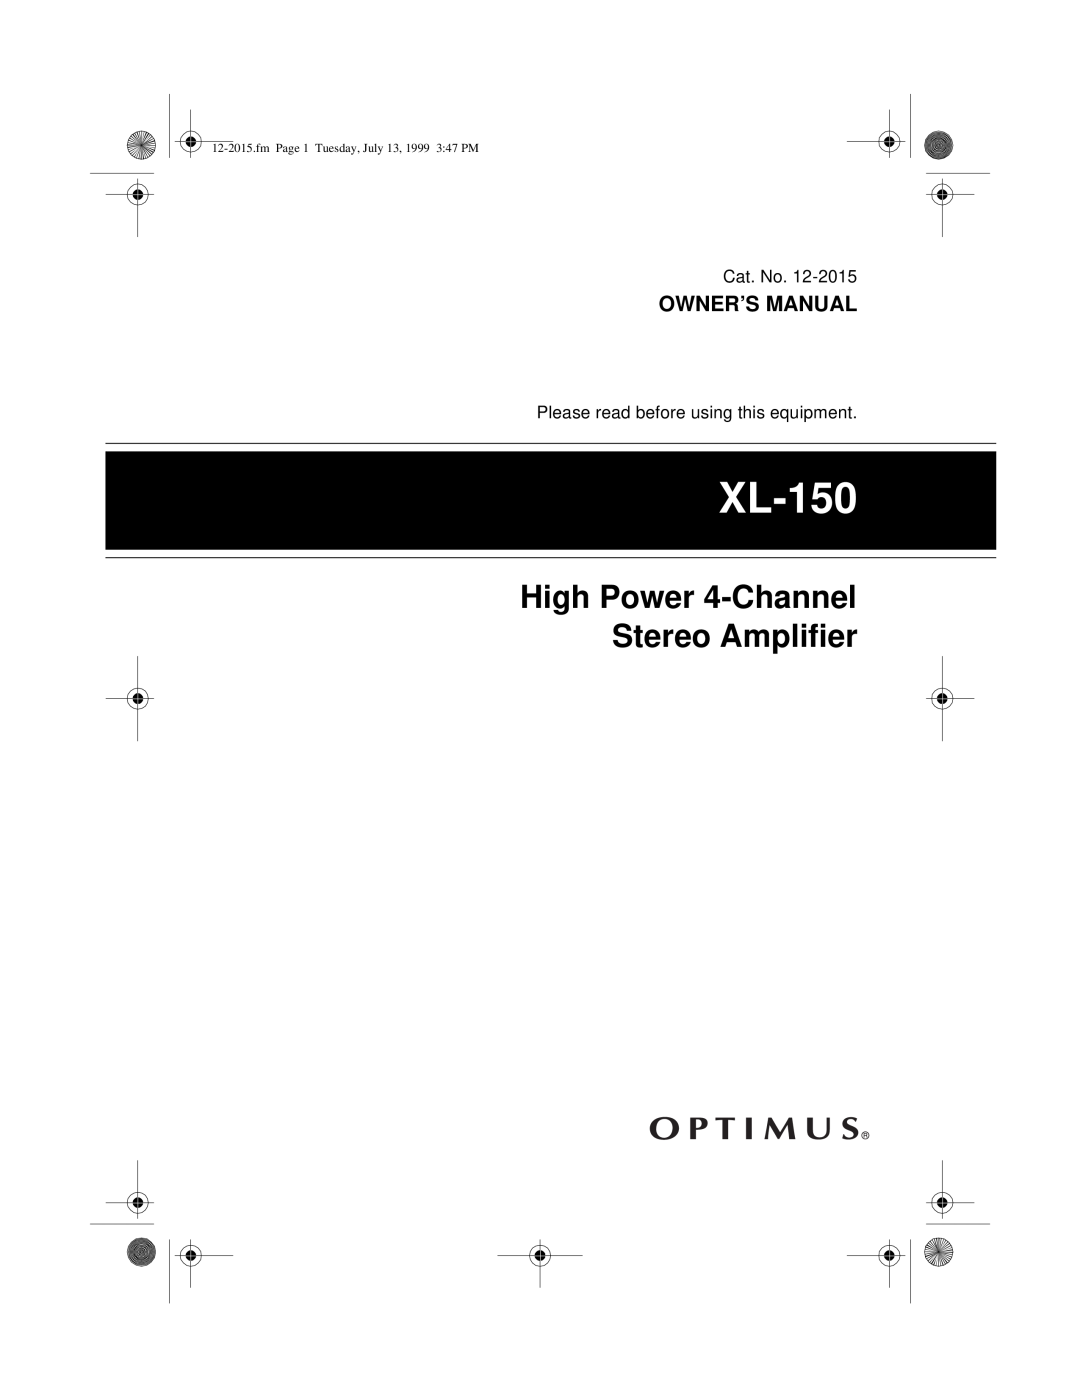 Radio Shack XL-150 owner manual High Power 4-Channel Stereo Amplifier, fmPage 1 Tuesday, July 13, 1999 3 47 PM 